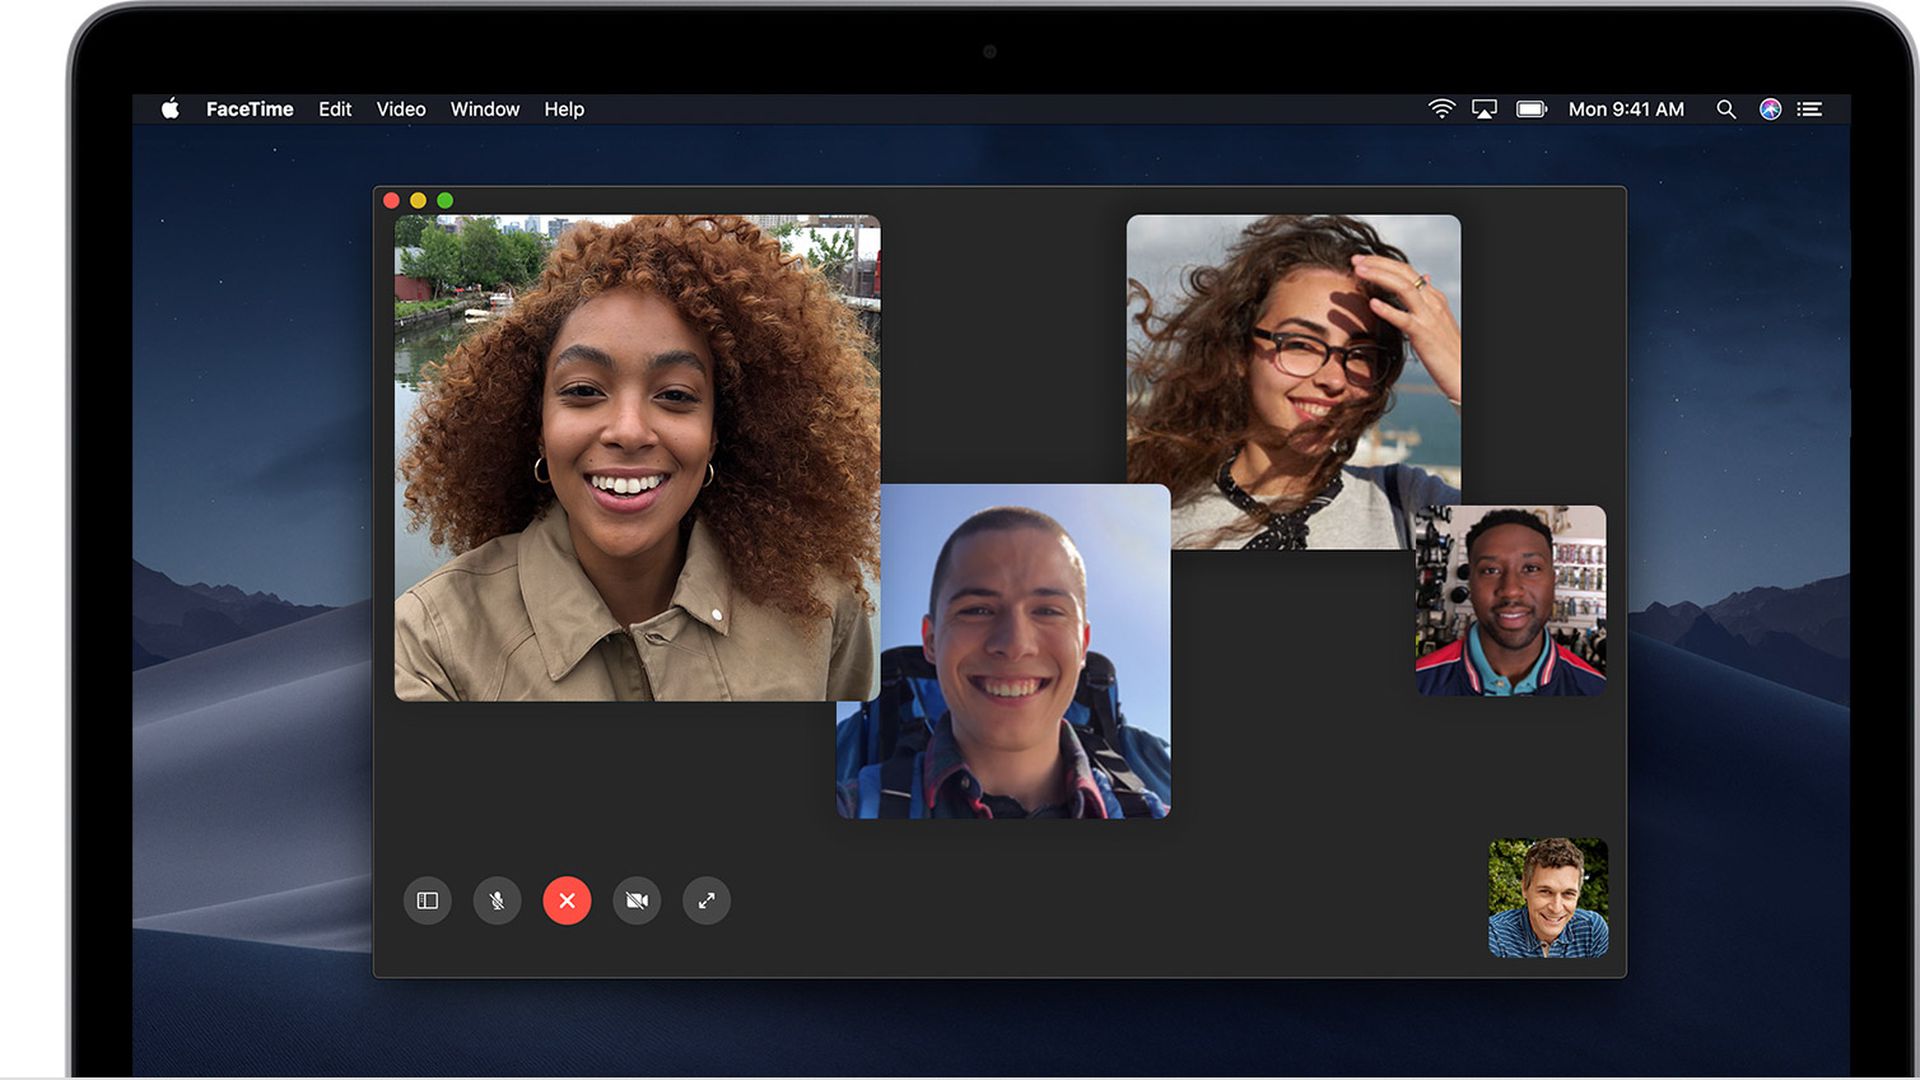 Does Facetime Work With Skype?